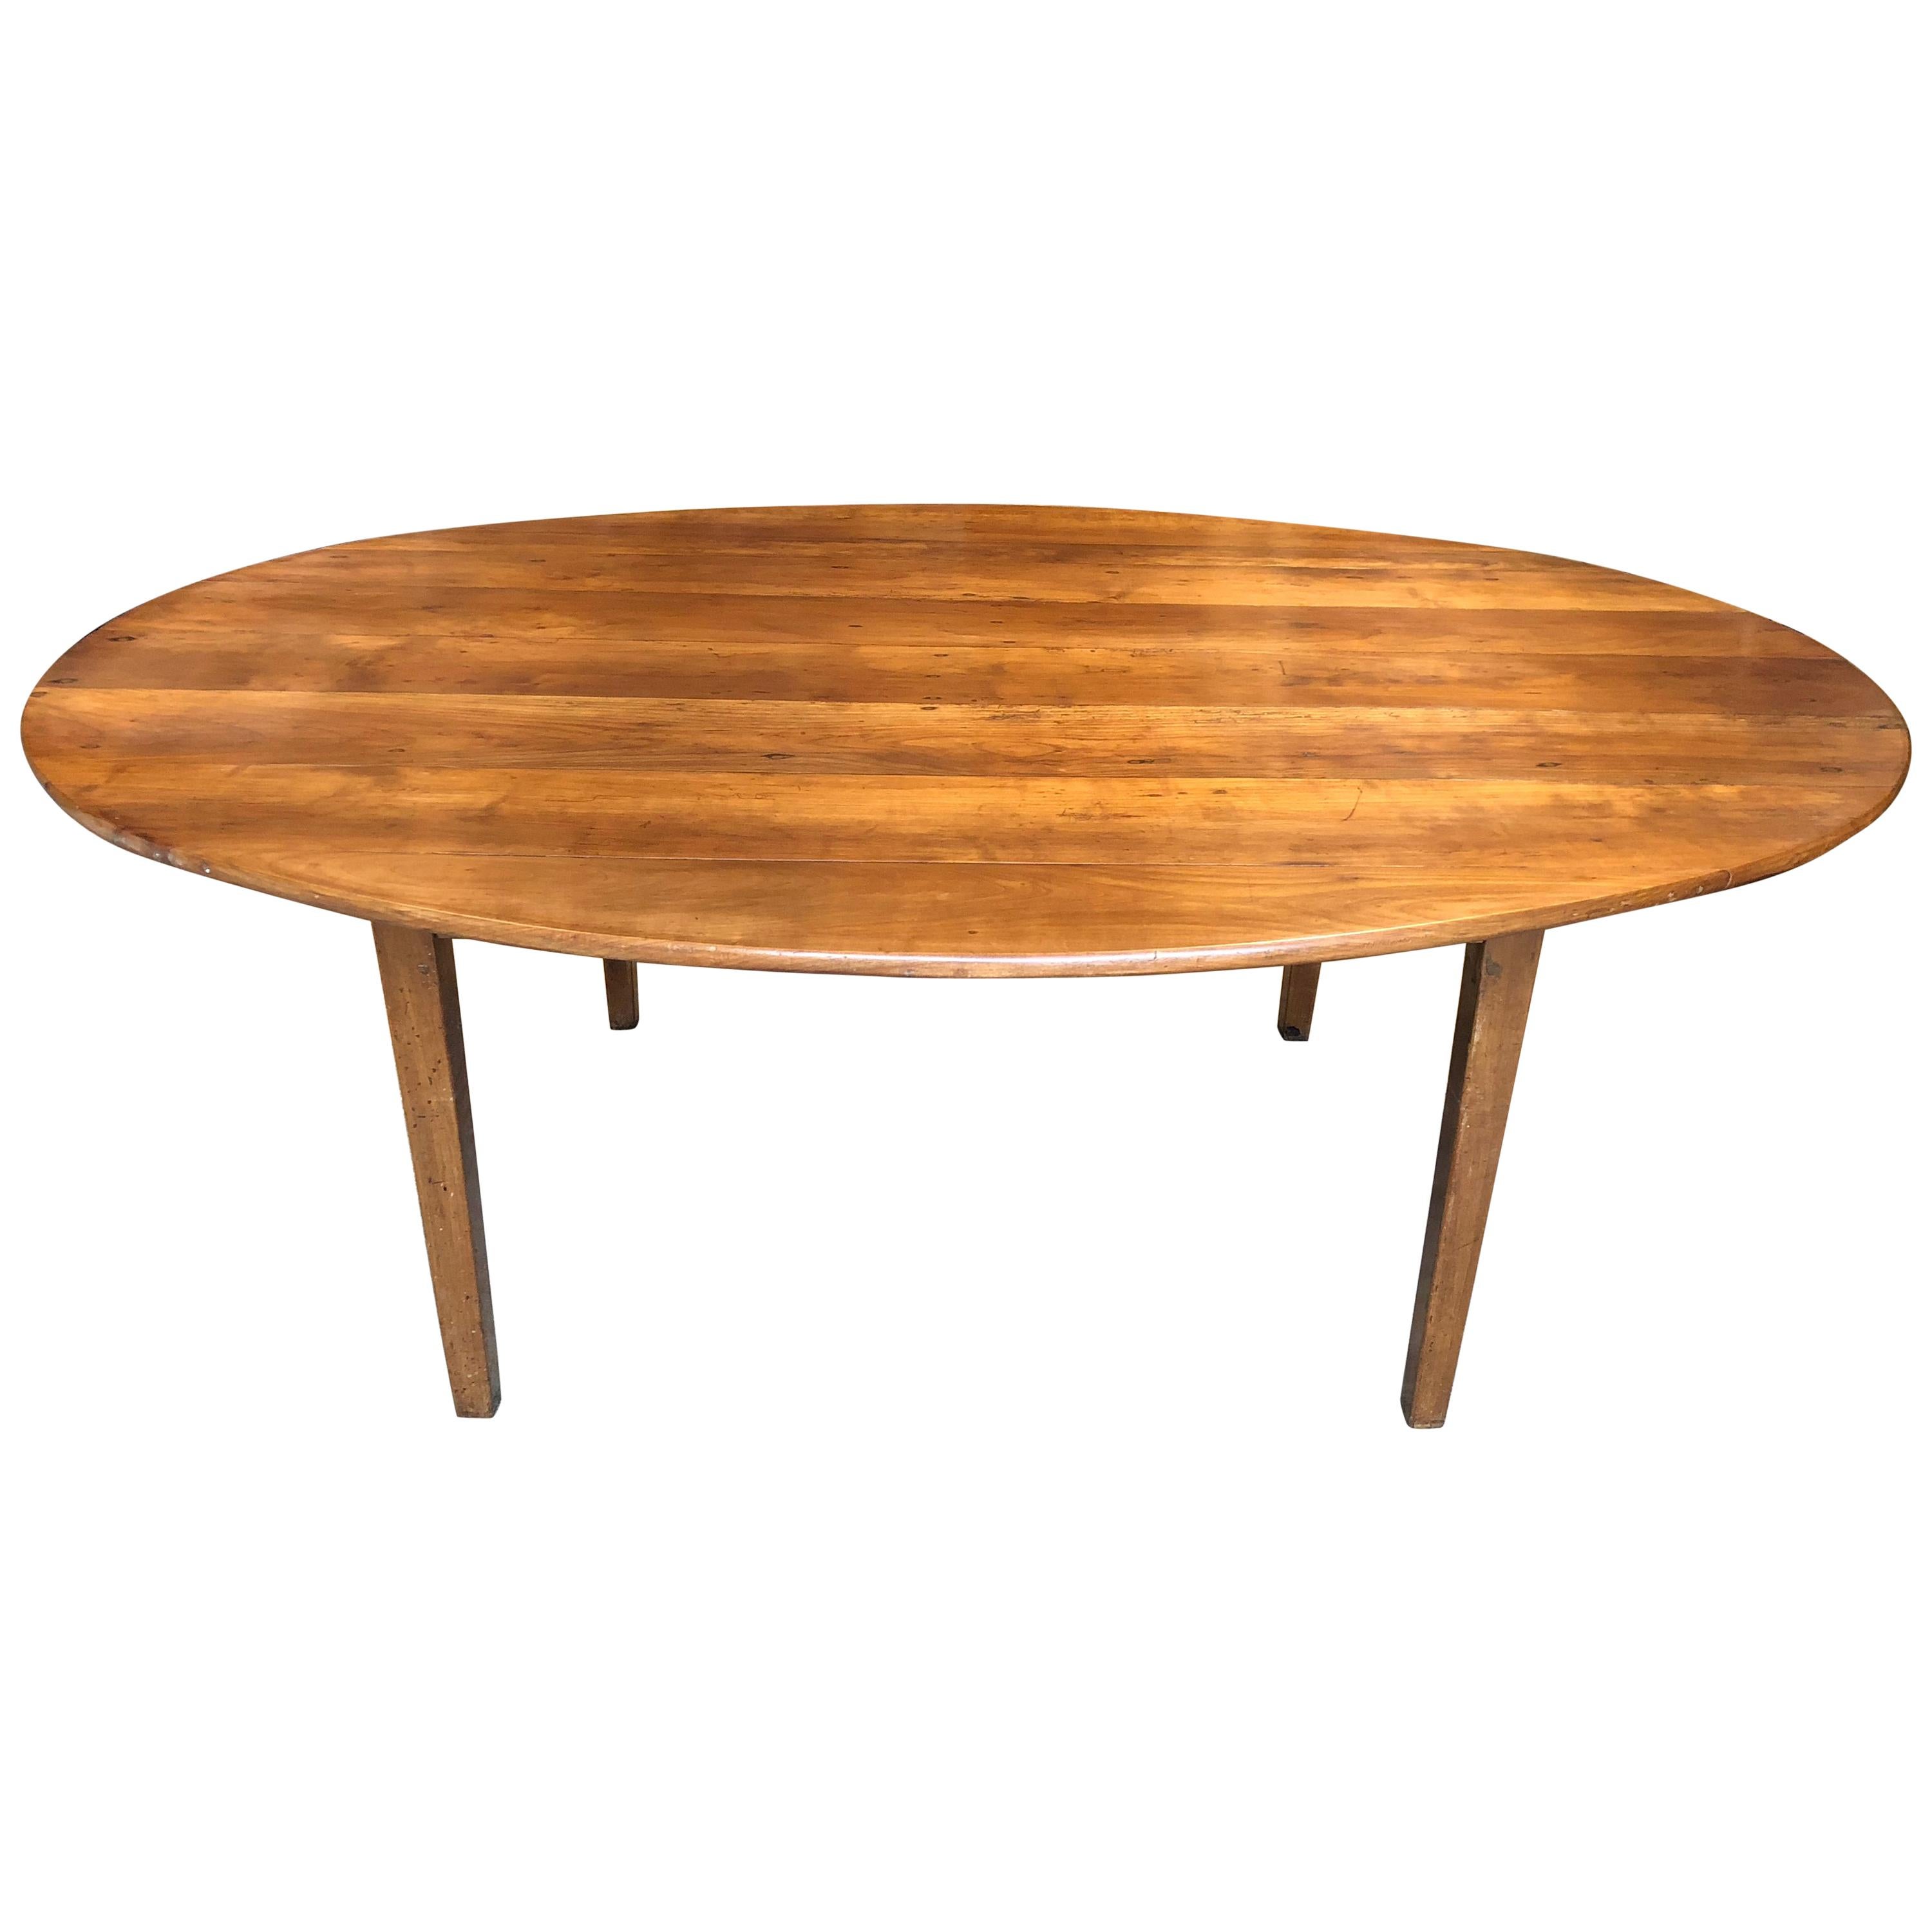 Large Oval Farm Table, Cherrywood, French, 19th Century